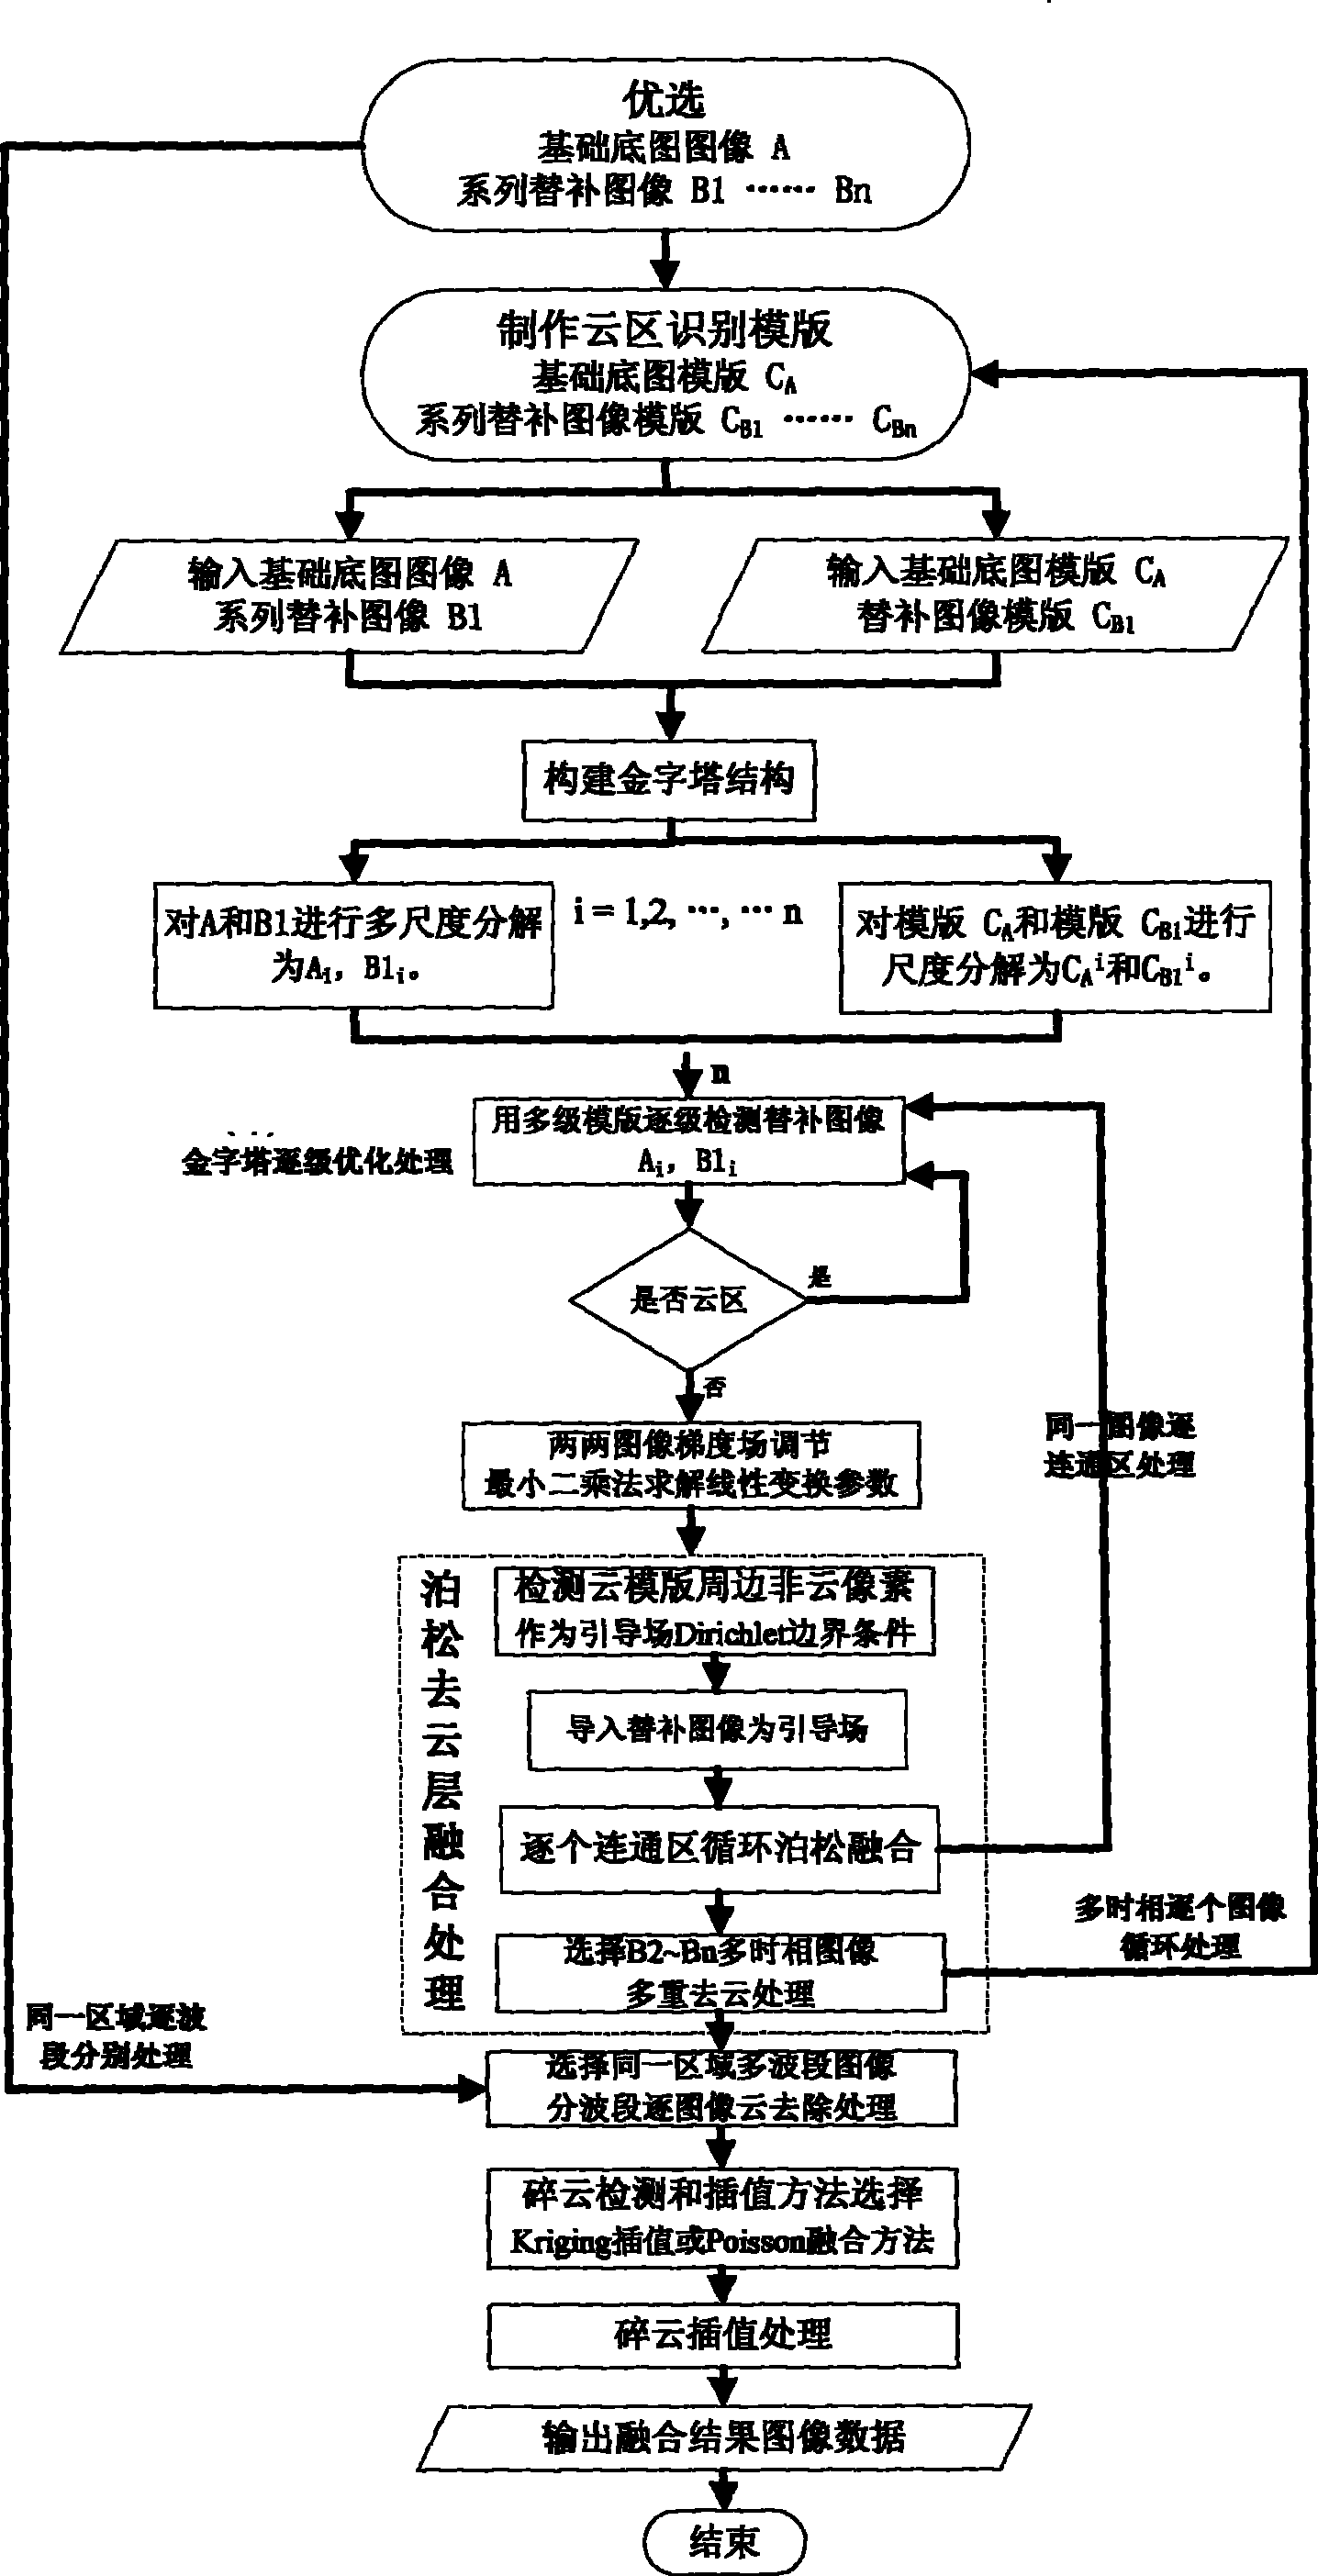 Possion method for removing cloud from optical remote sensing image